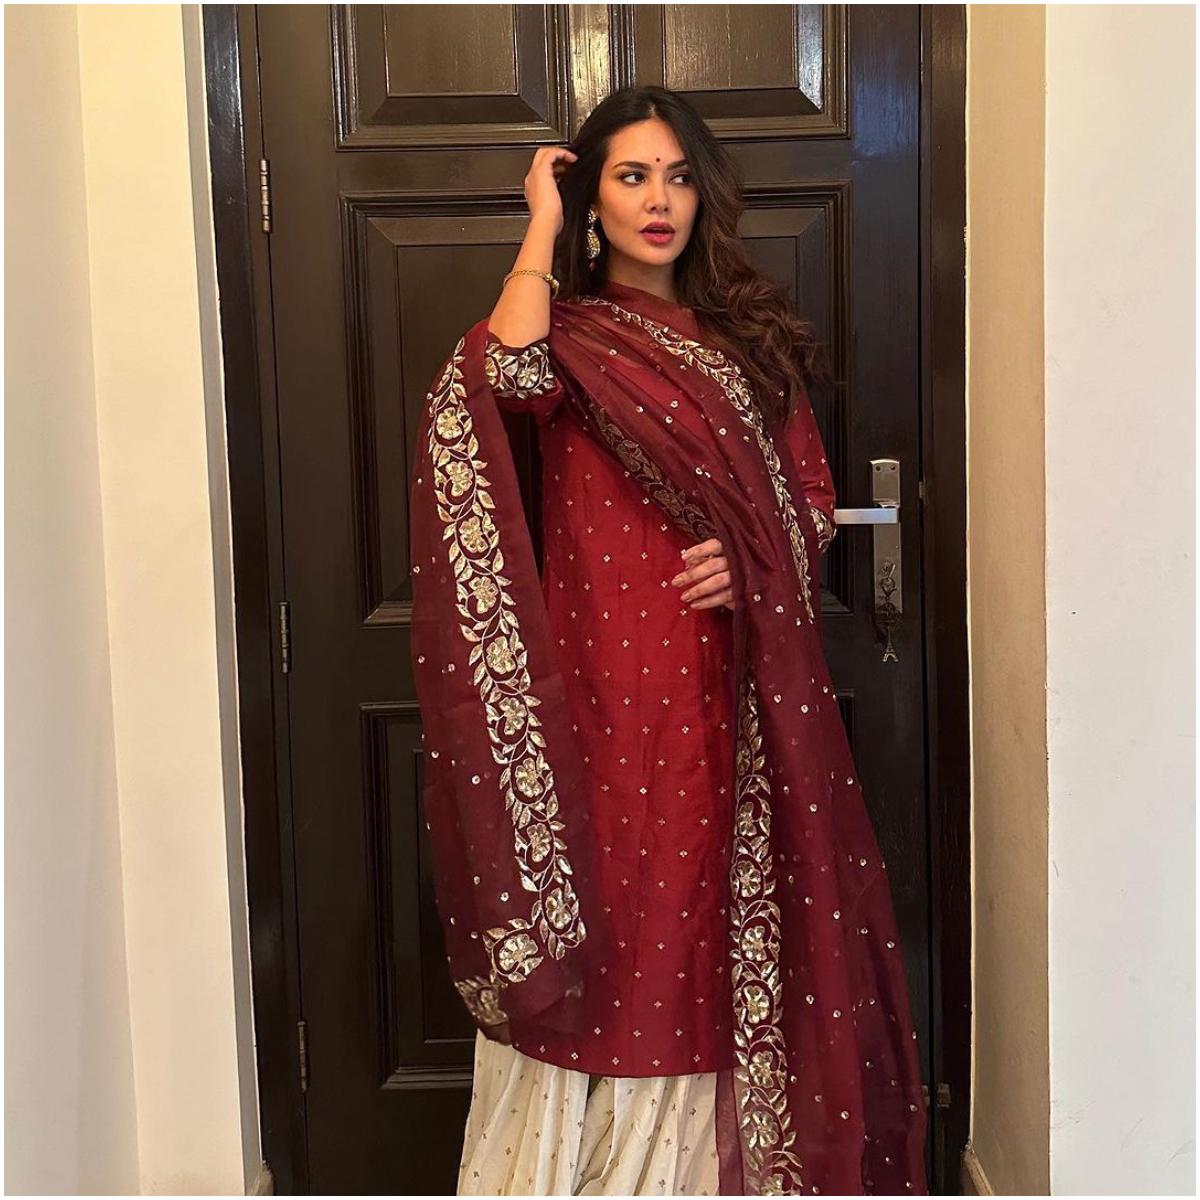 Another simple ethnic look from Esha. The actress pairs a maroon kurta and dupatta with a beige salwar for this festive outfit